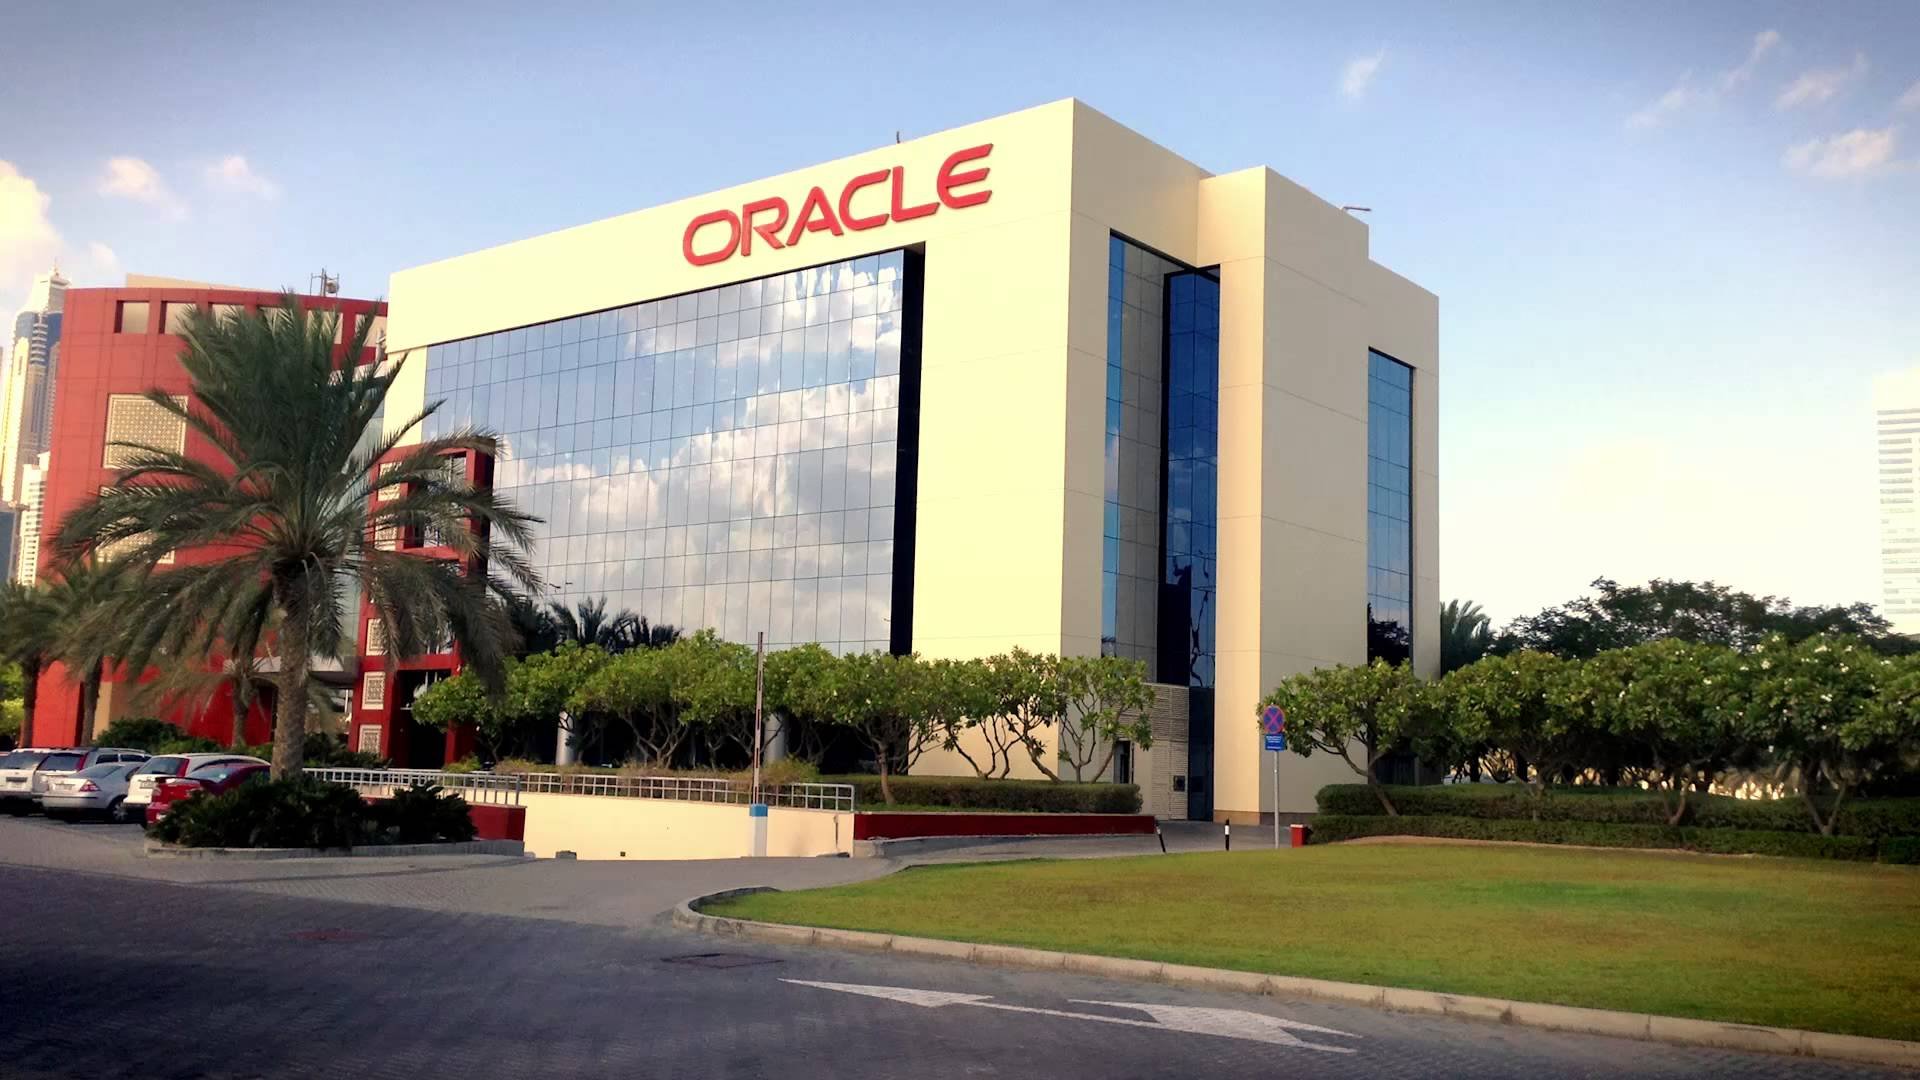 Oracle is building a data center in Abu Dhabi - DCD